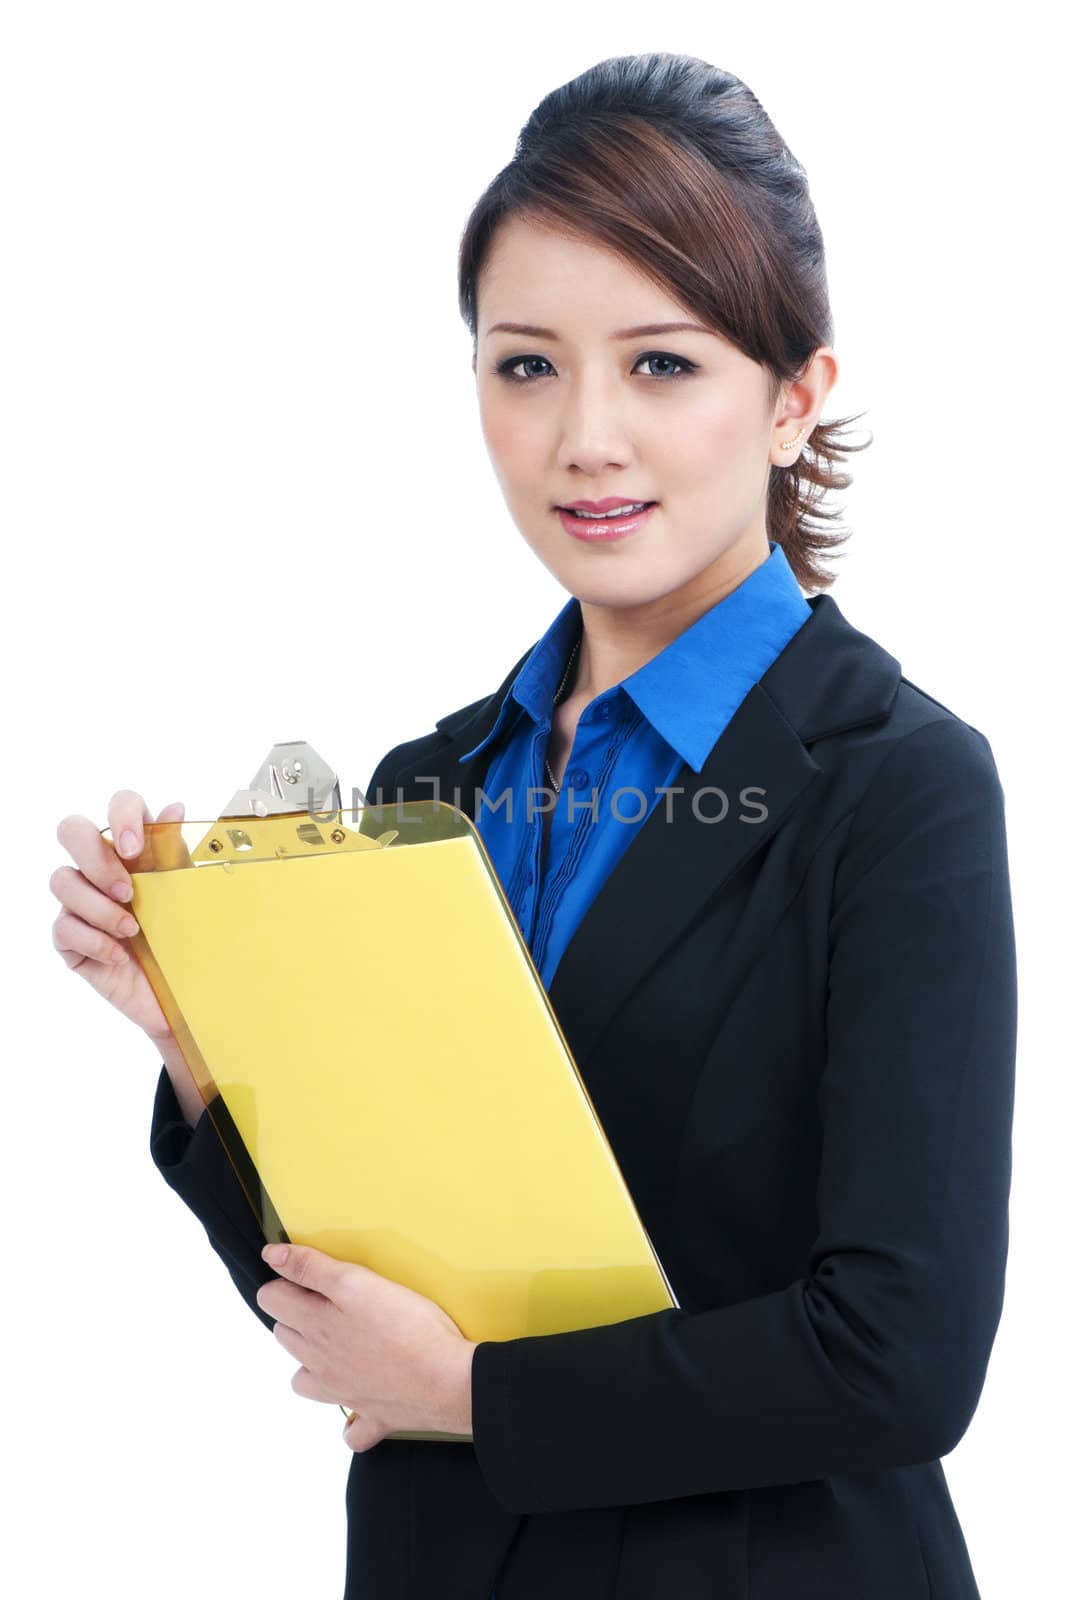 Portrait of an attractive business woman holding clipboard, isolated on white background.